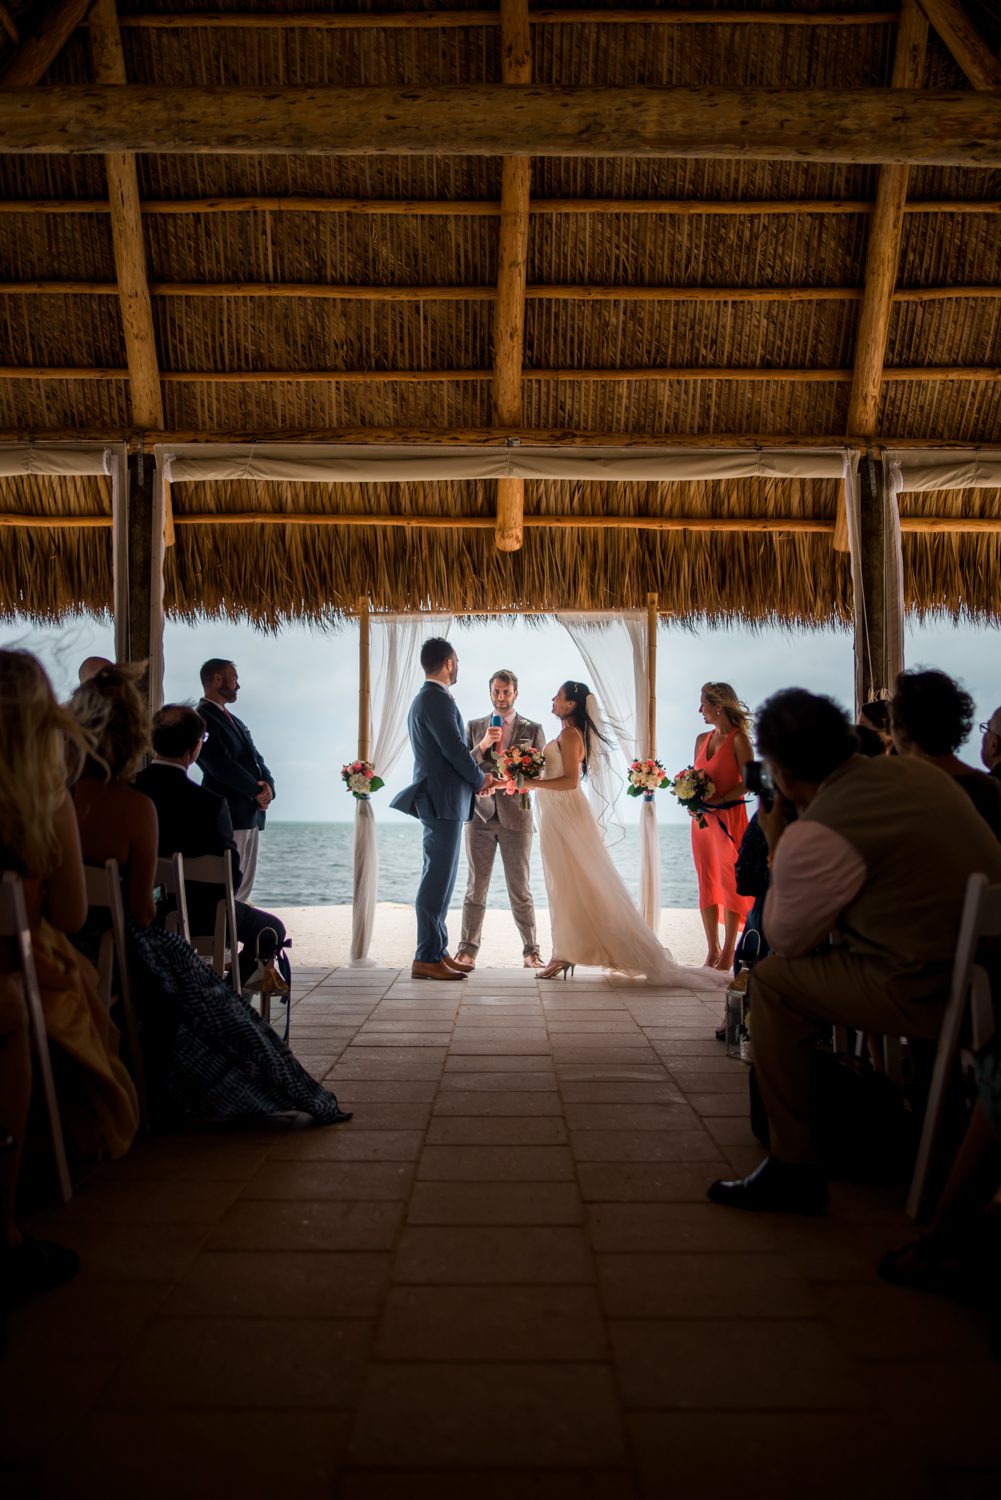 A bride and groom standing under a thatched gazebo at a Florida Keys wedding beach venue.